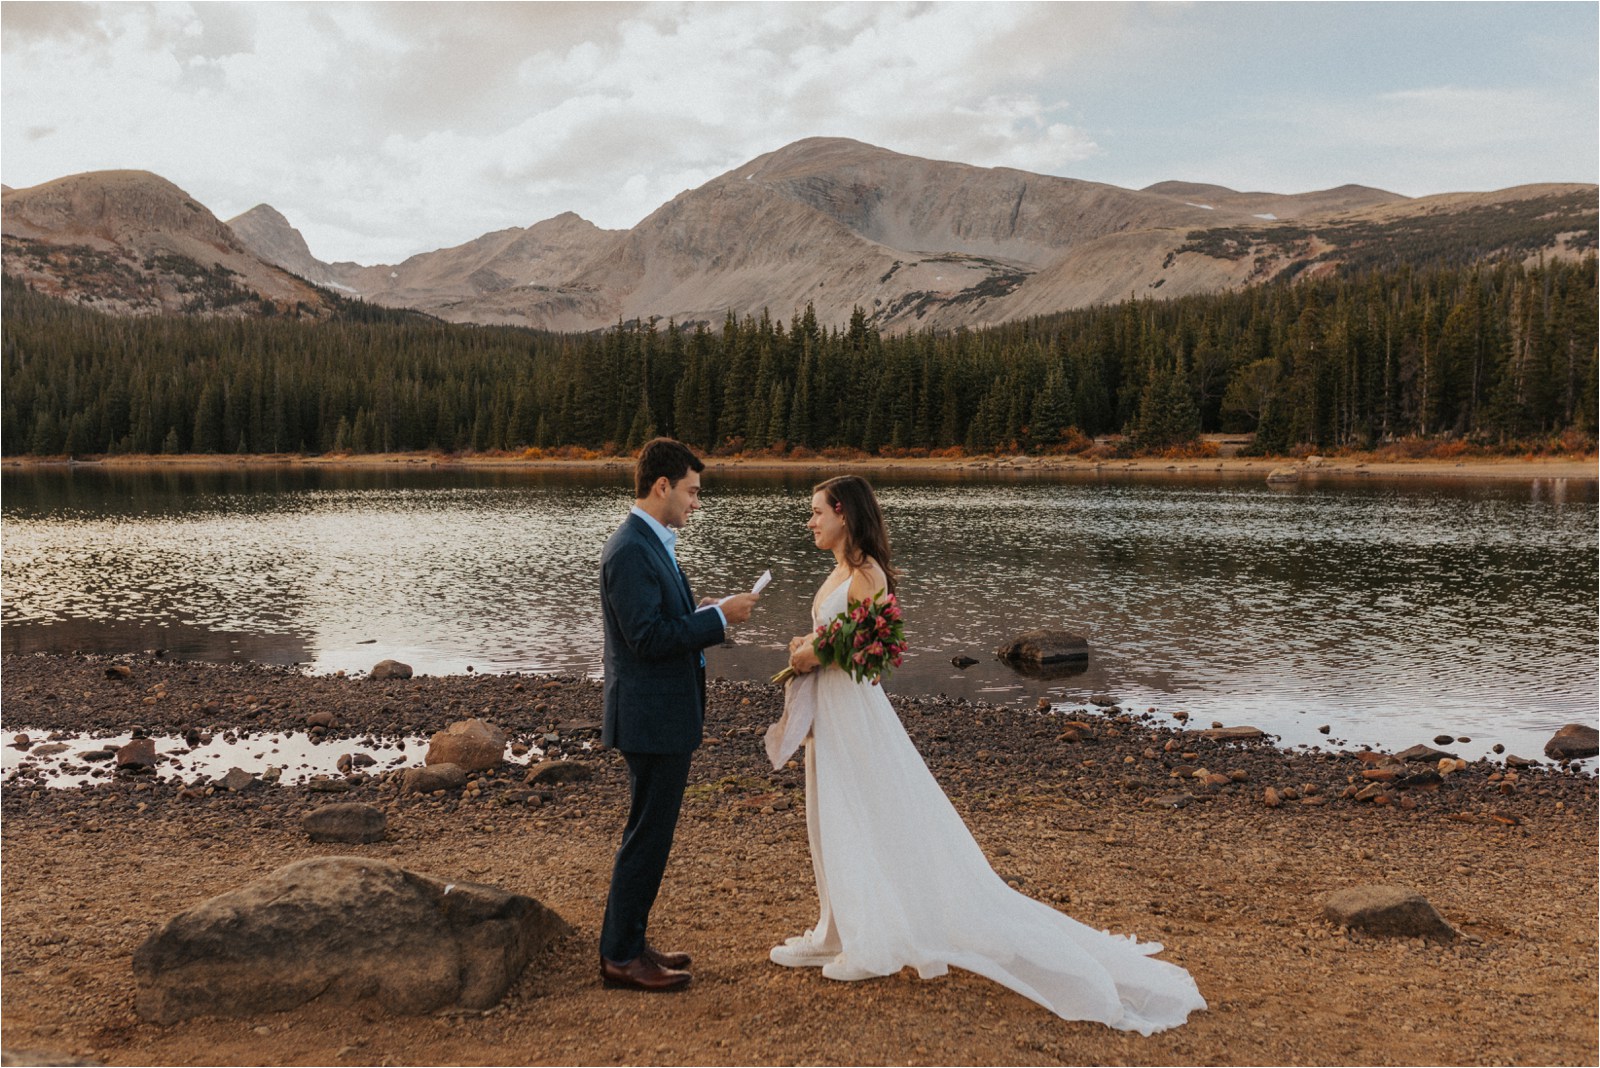 Bride and groom exchanging vows for their elopement in Colorado, standing in front of a lake, with mountains and trees in the distance.